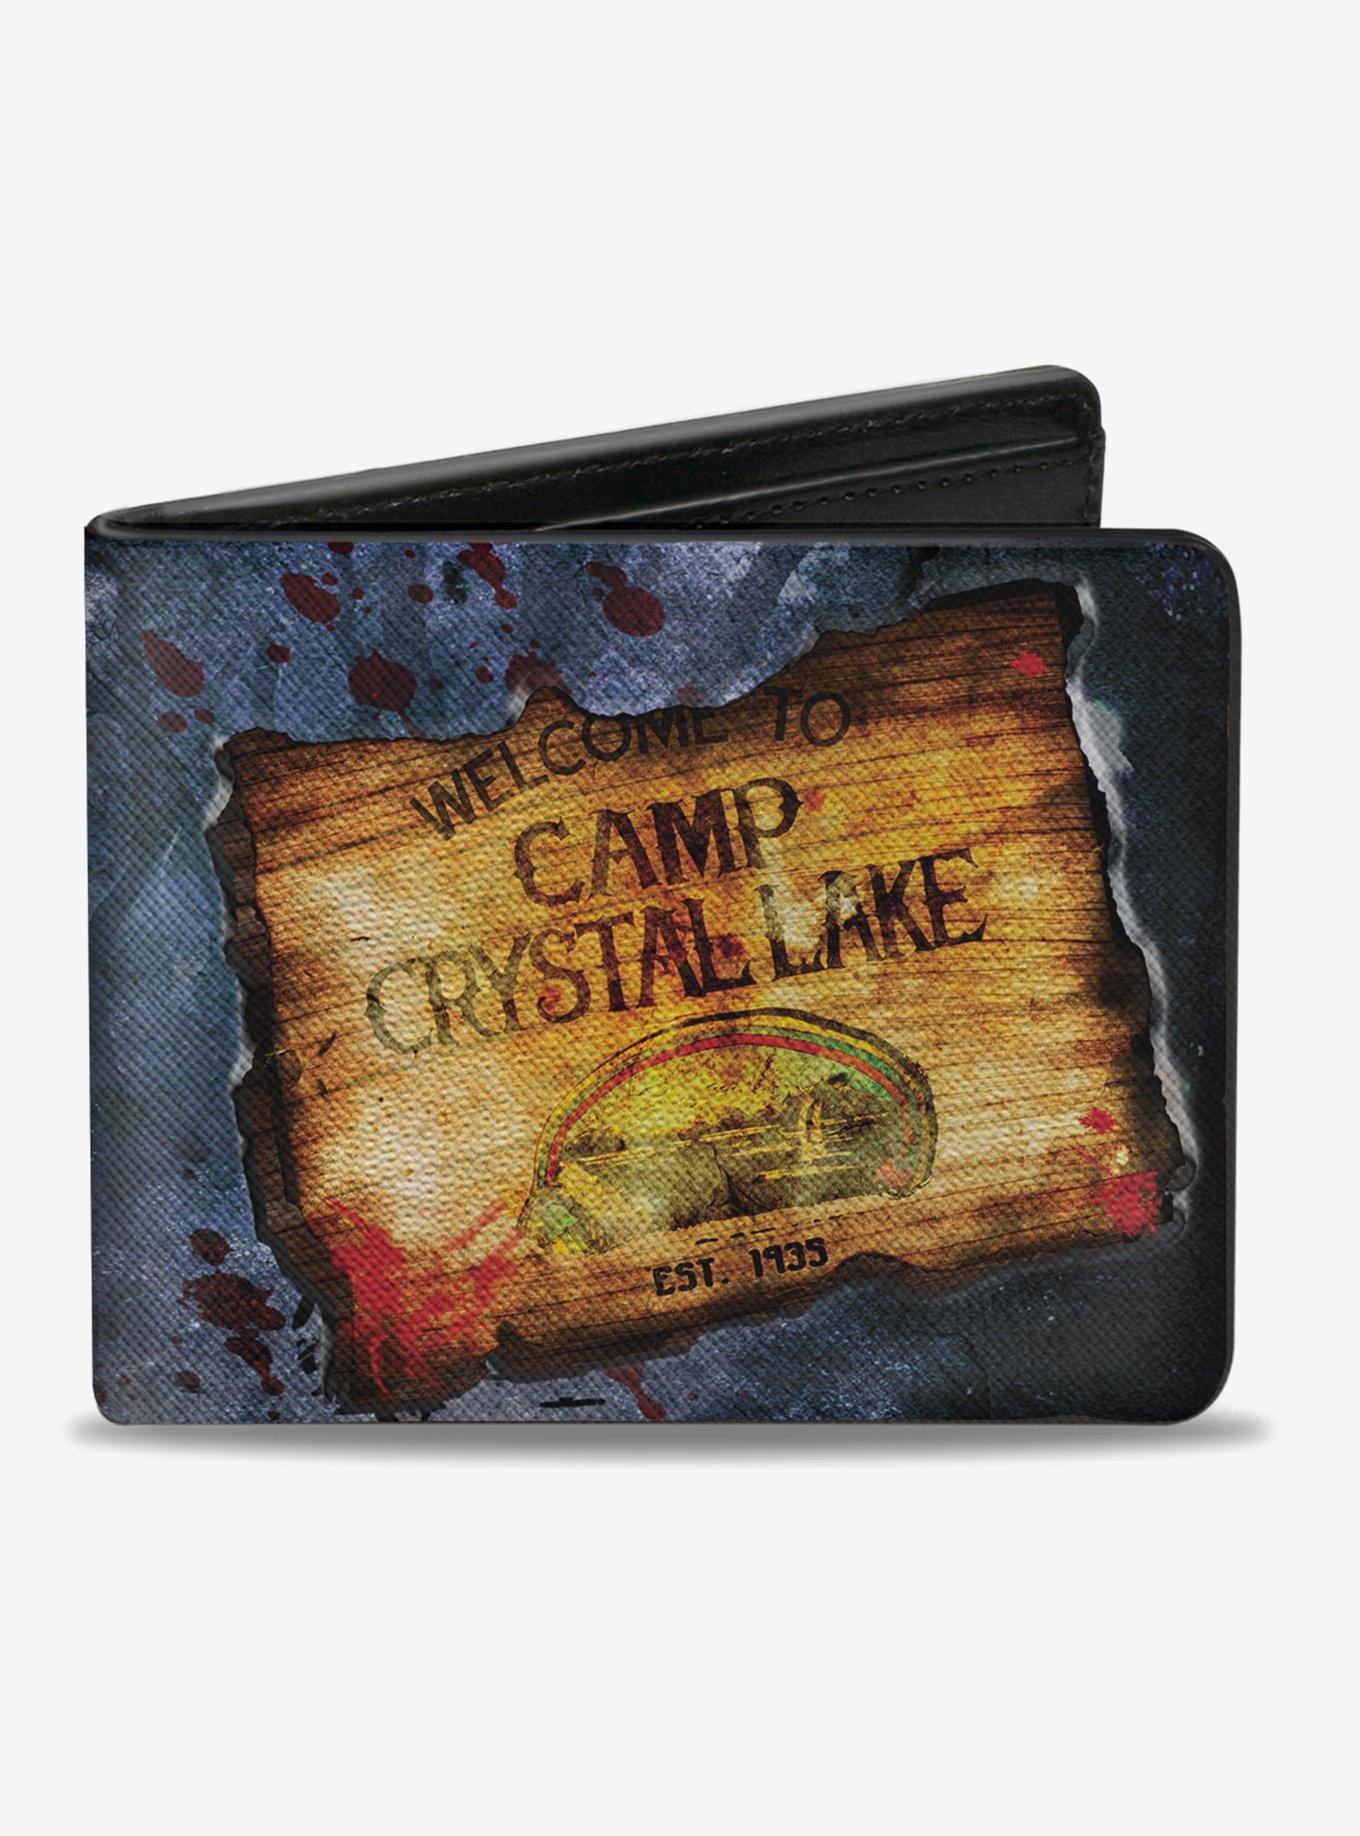 Friday the 13th Welcome to Camp Crystal Lake Sign Bifold Wallet, , hi-res